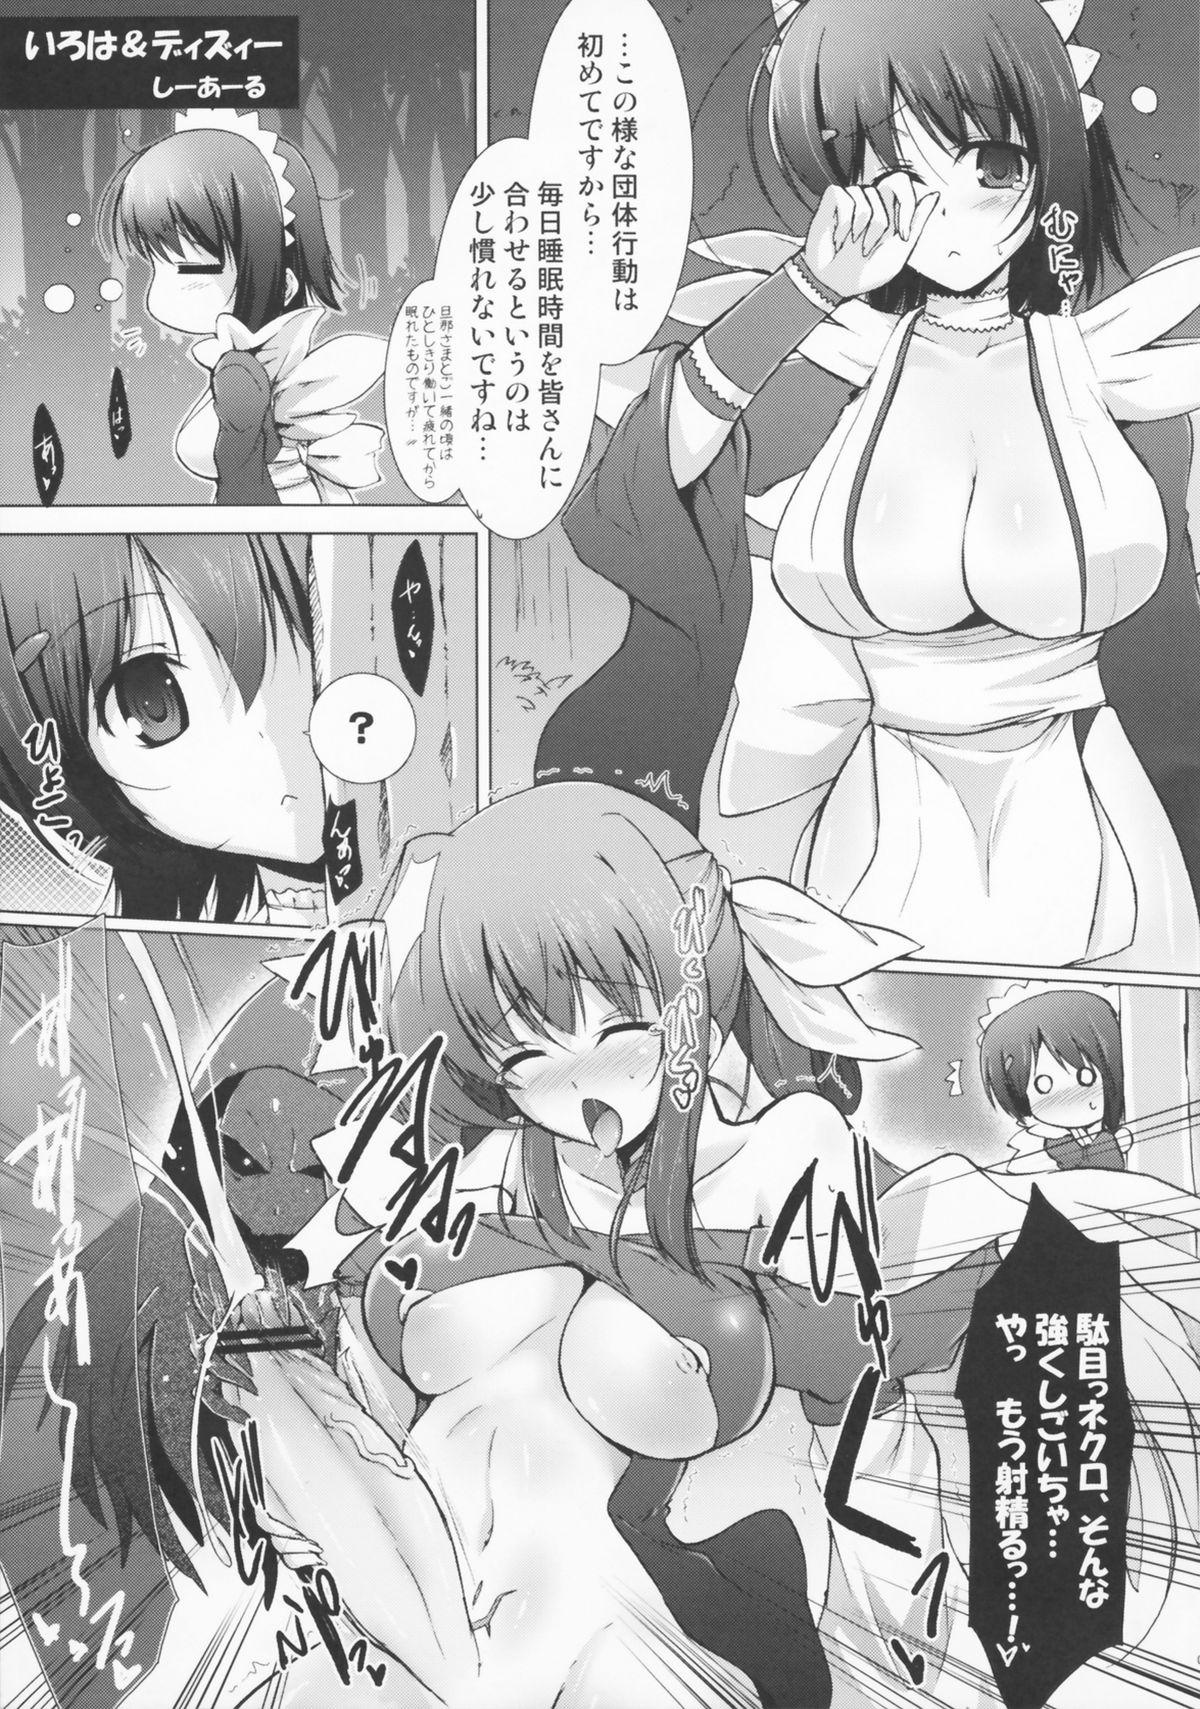 Old Vs Young OPEN SESAMI!! - Queens blade Guilty gear Cream Pie - Page 5